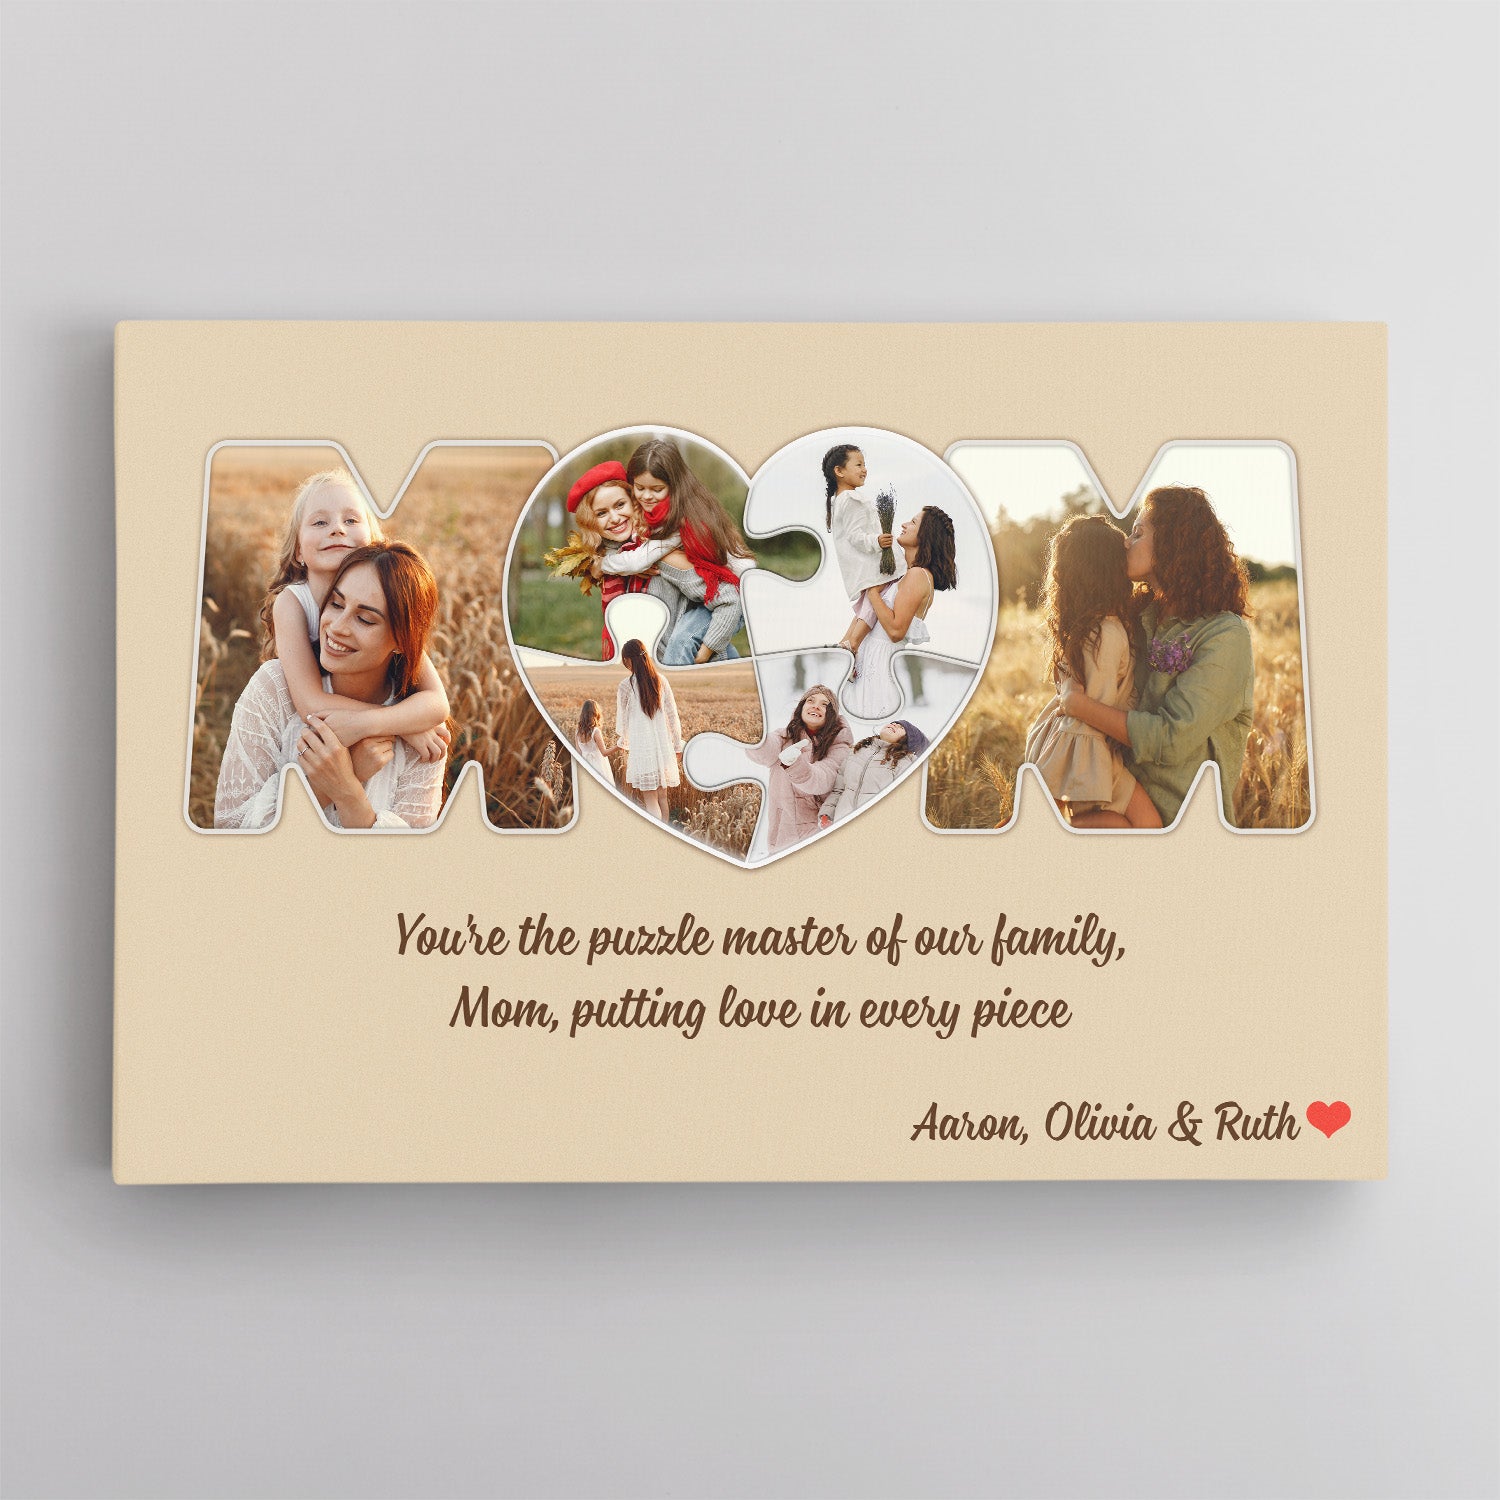 Personalized MOM Puzzle Photo Collage Canvas Wall Art